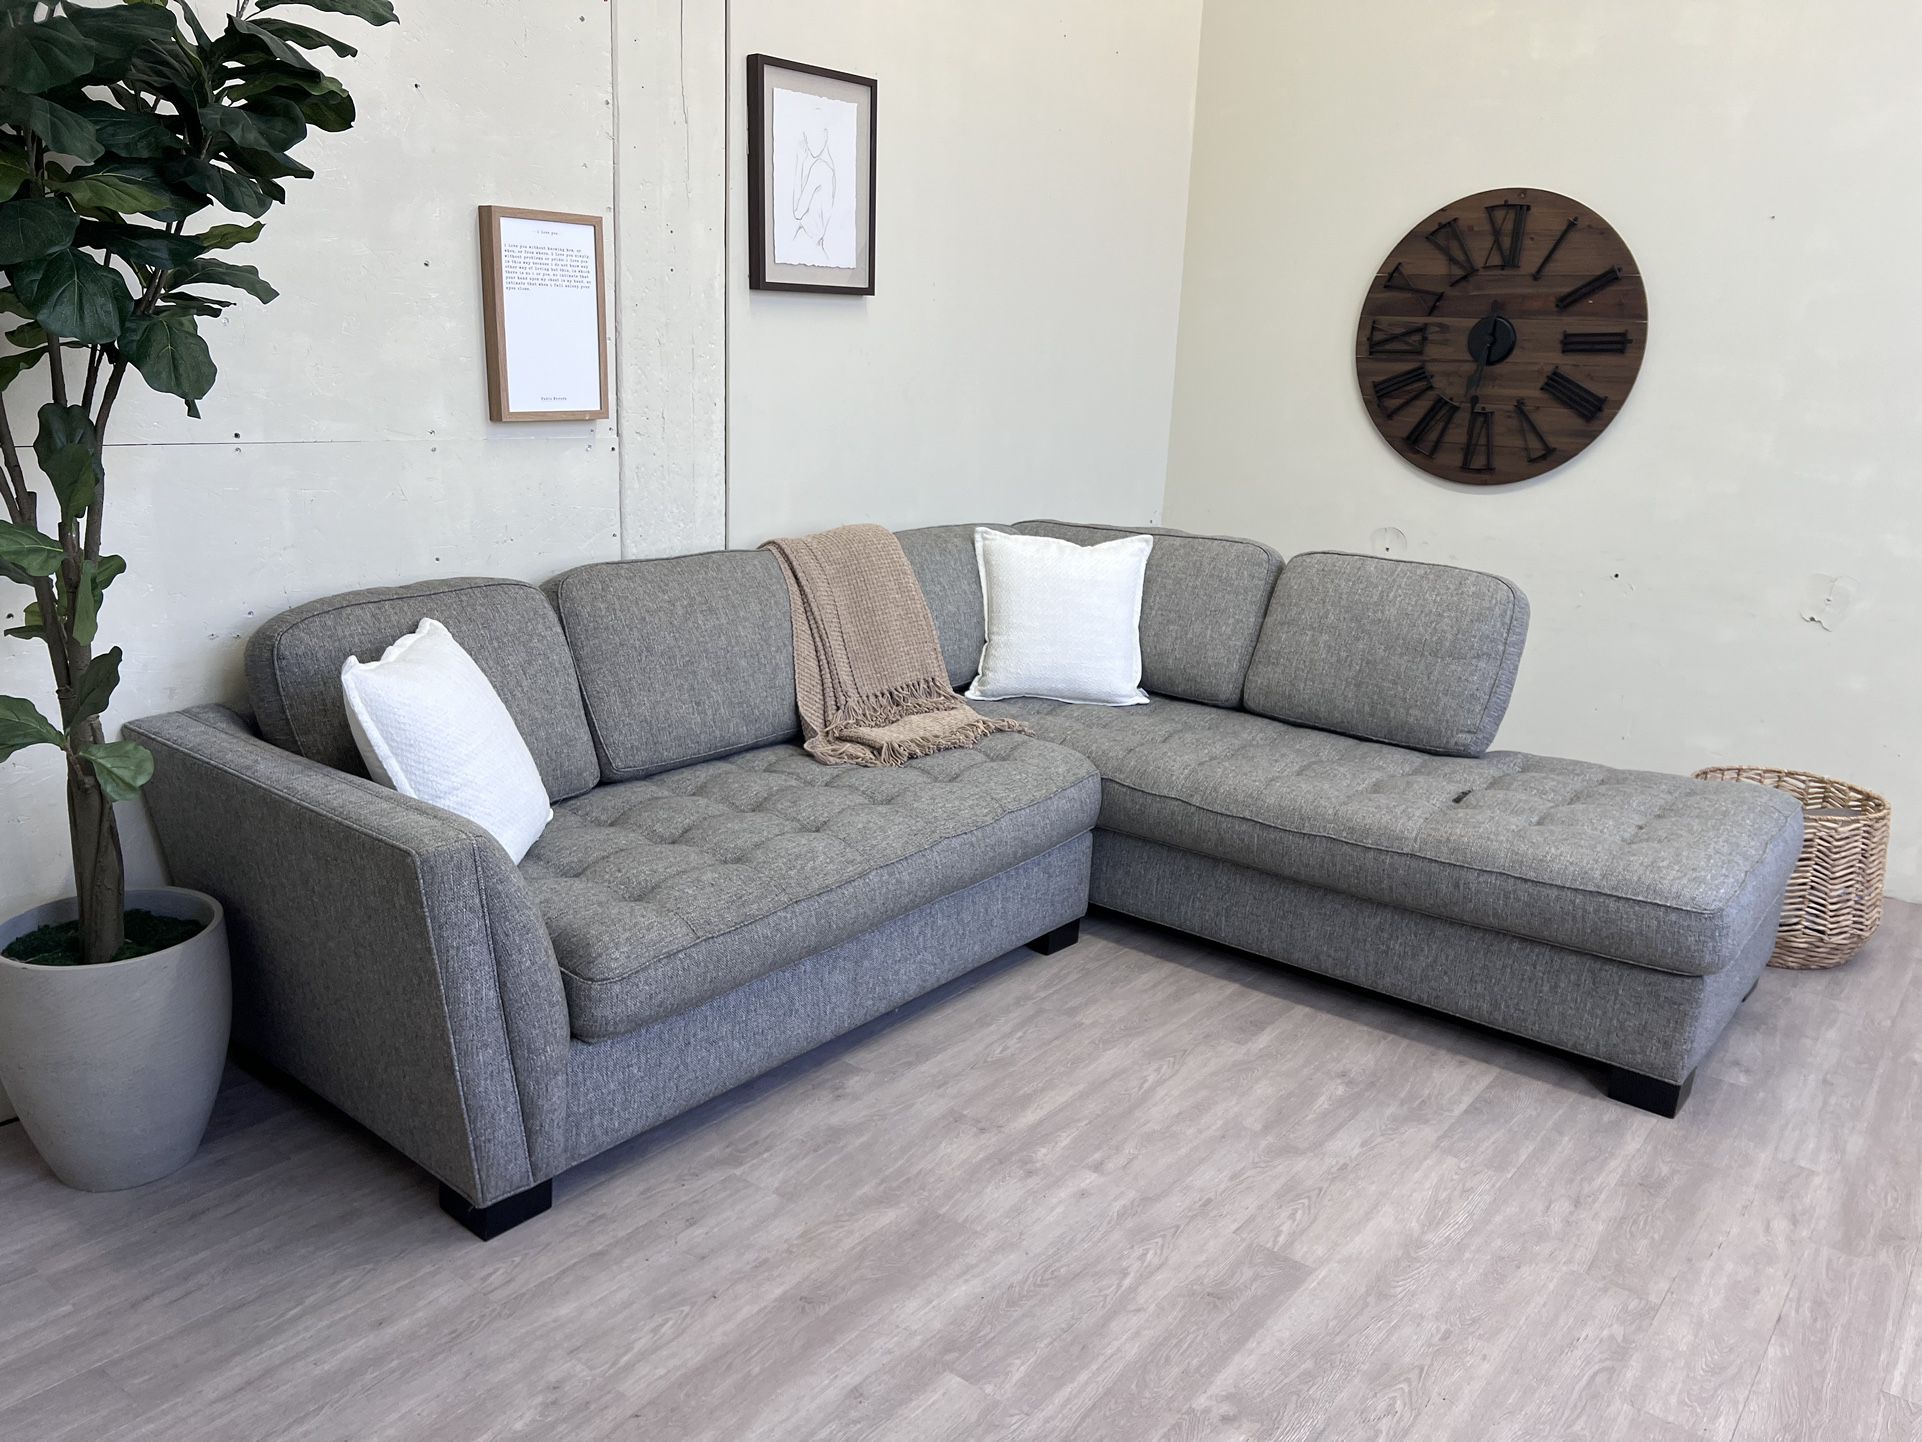 FREE DELIVERY! 🚚 - Bernie & Phyl’s Gray Tufted Modern Sectional Couch with Chaise